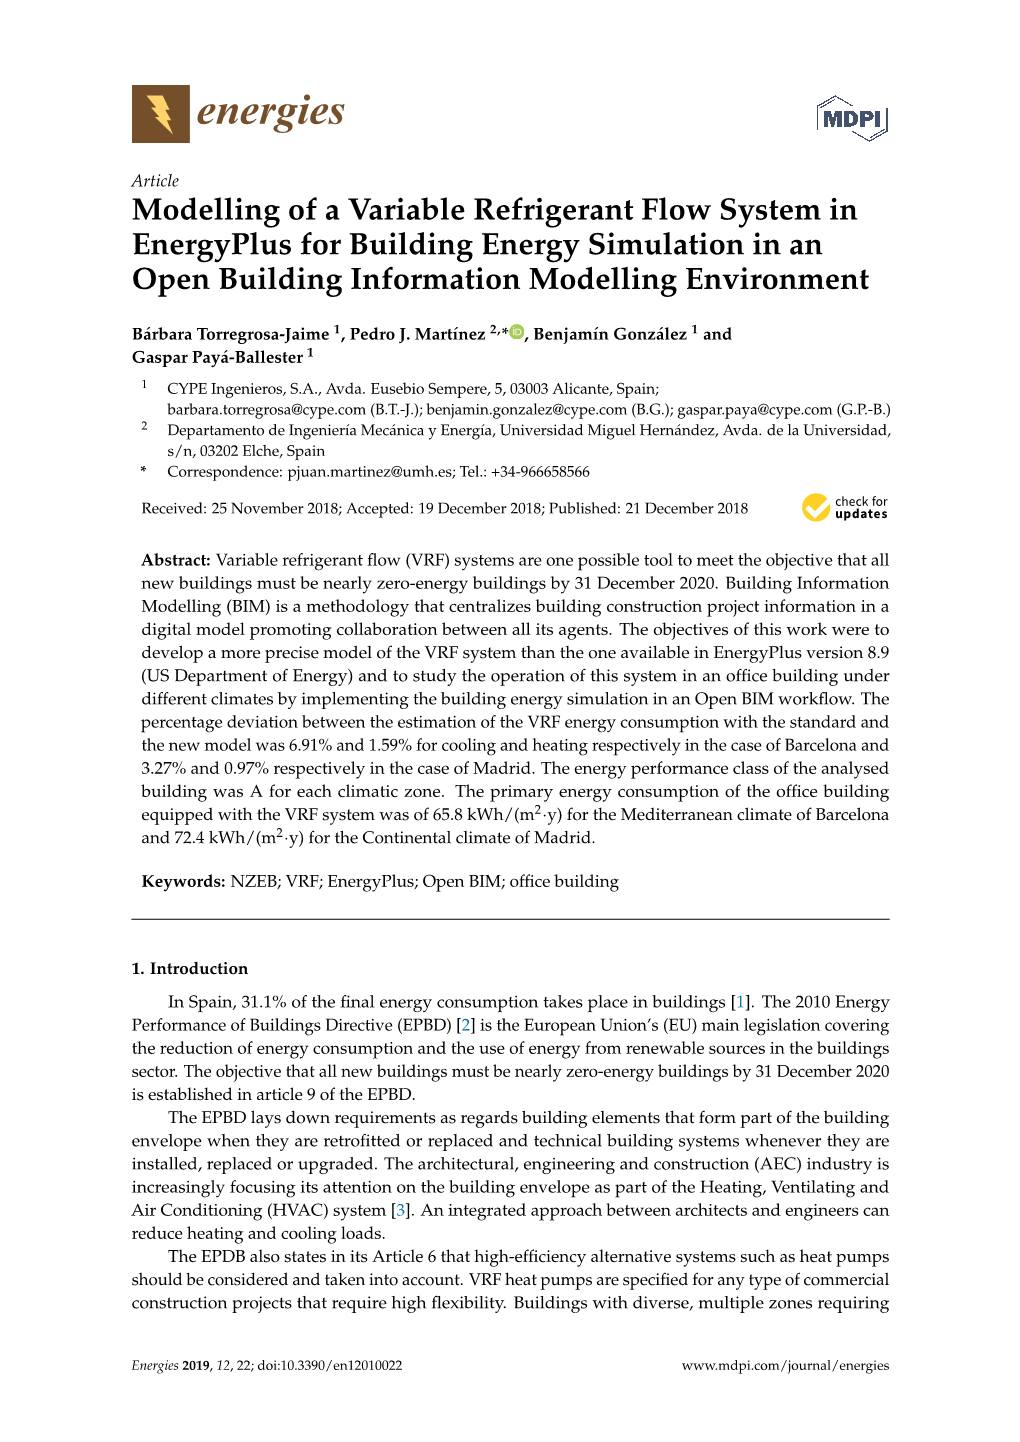 Modelling of a Variable Refrigerant Flow System in Energyplus for Building Energy Simulation in an Open Building Information Modelling Environment